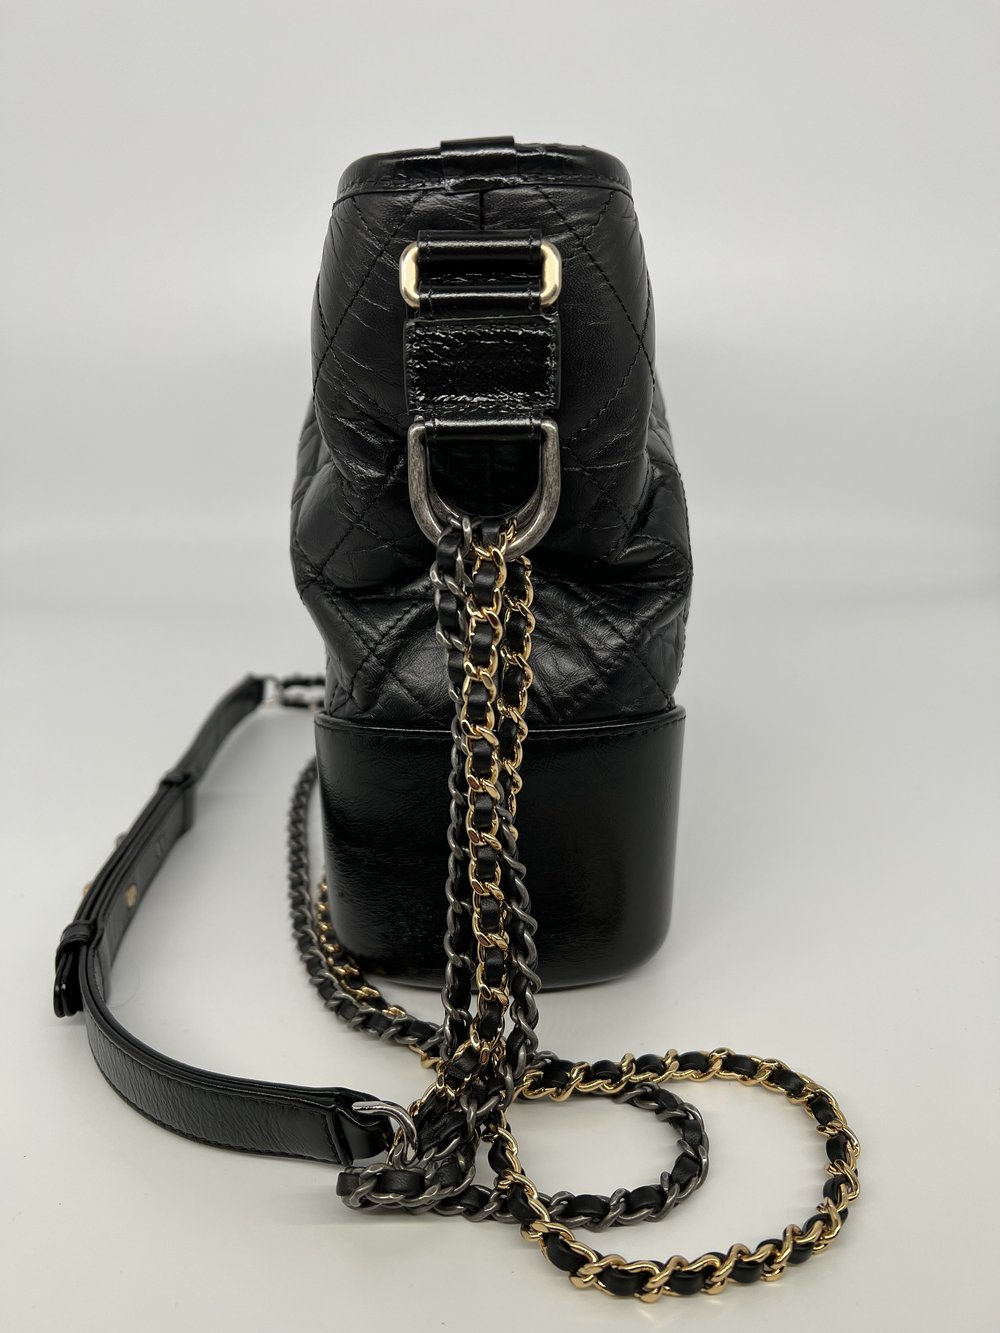 Chanel Gabrielle Large Black GHW - SOLD